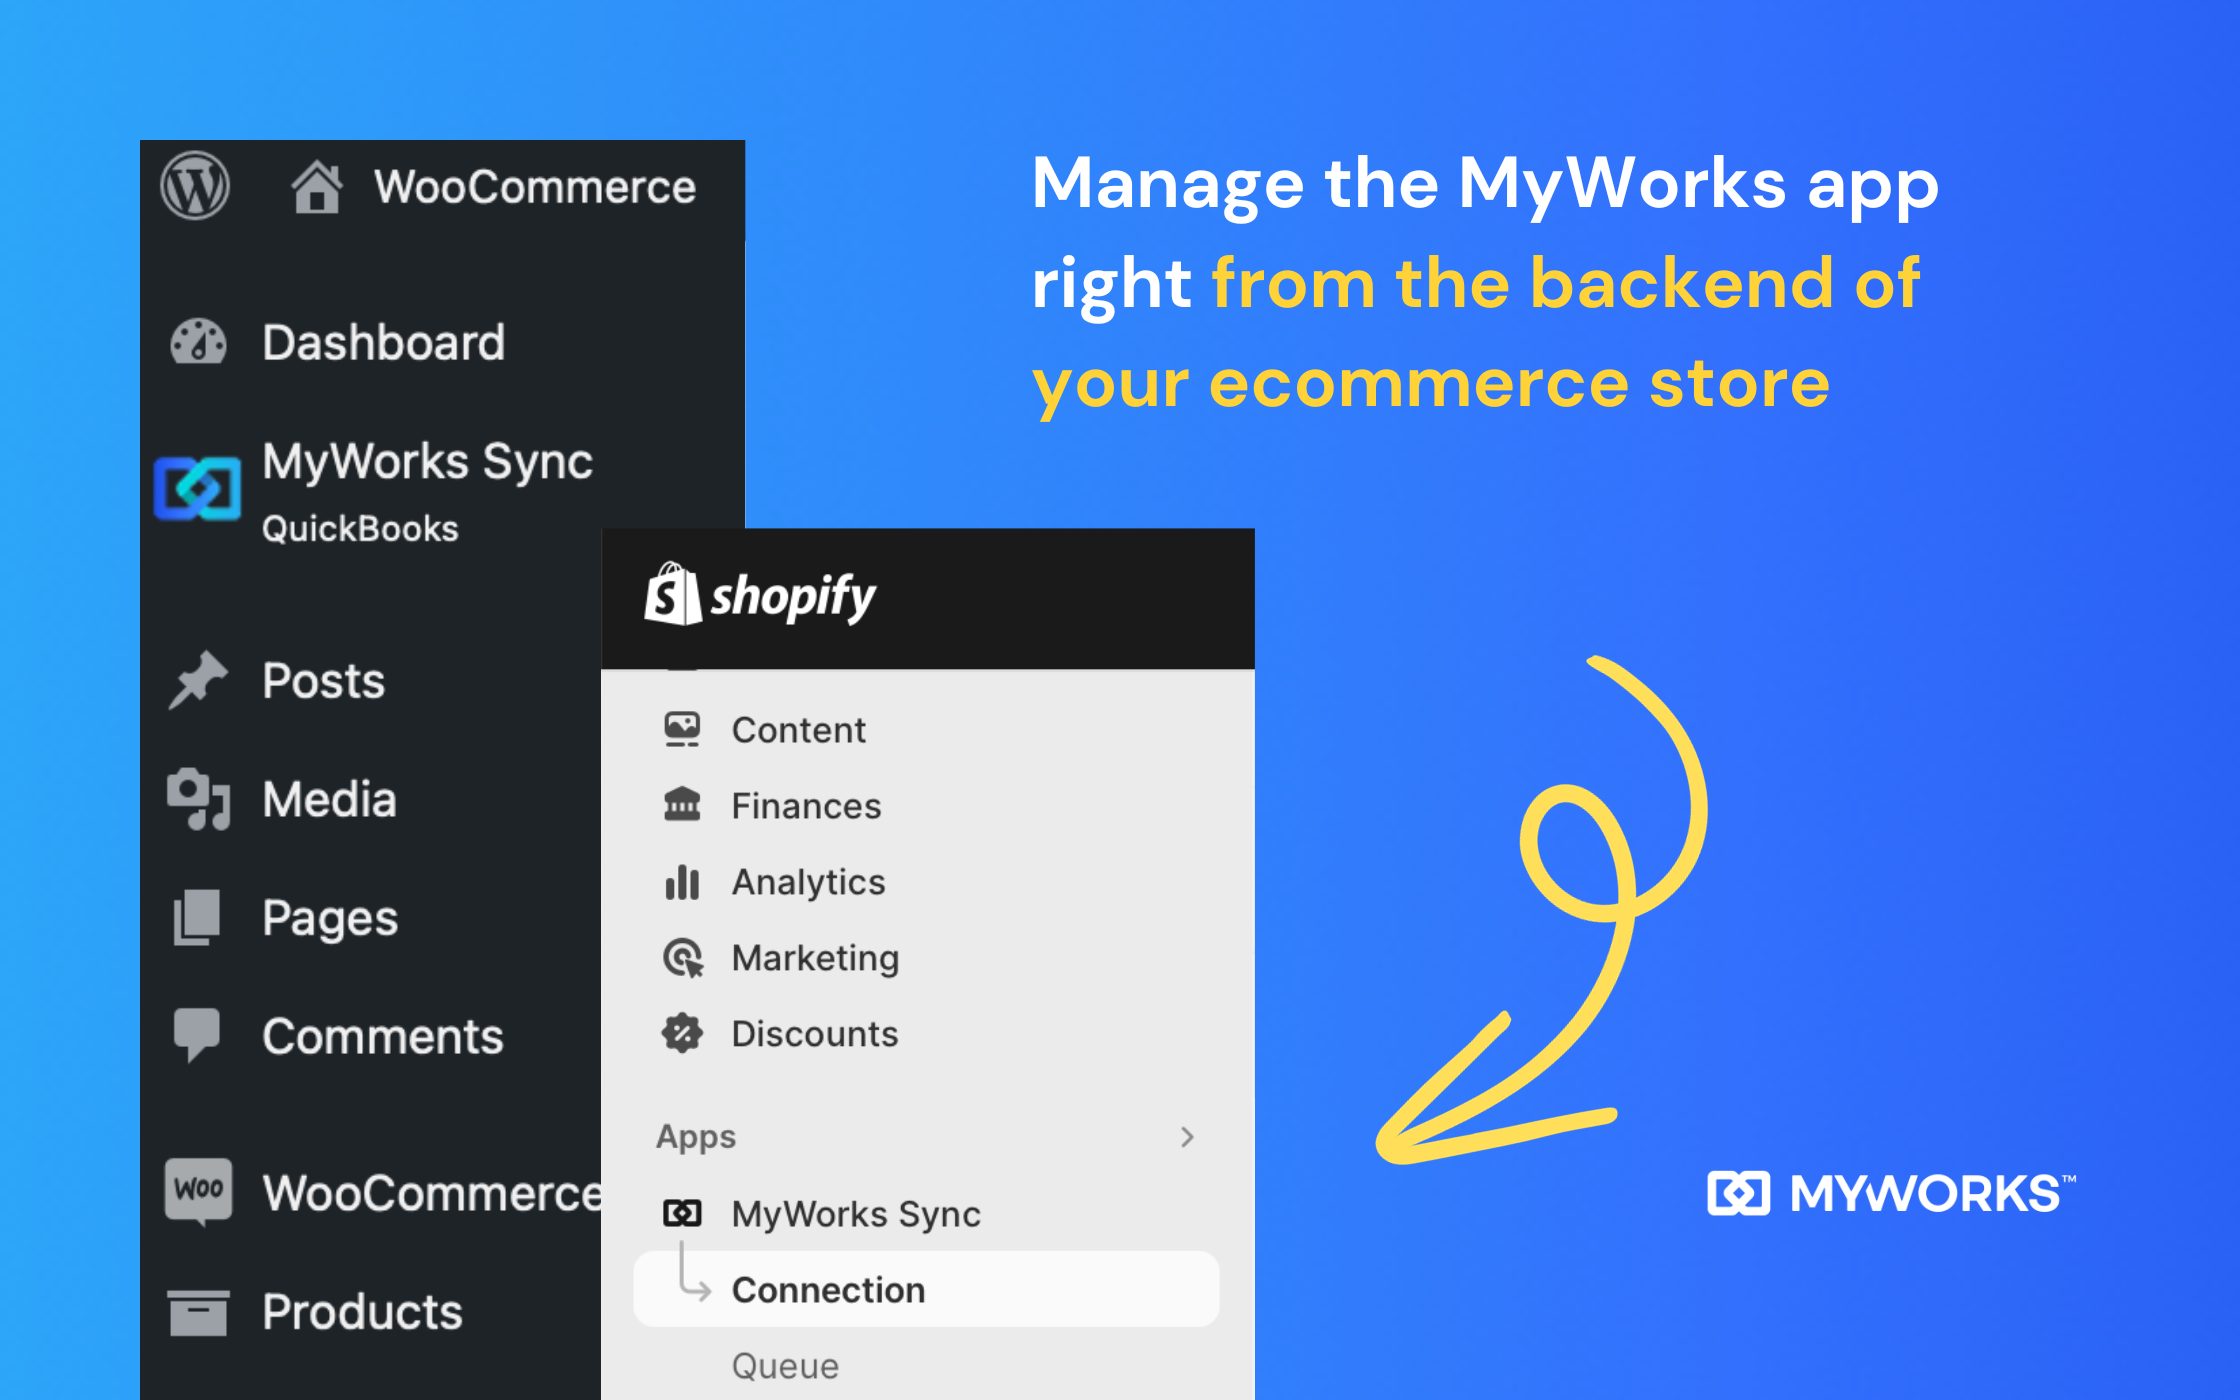 Easy to find & manage in the backend of your store